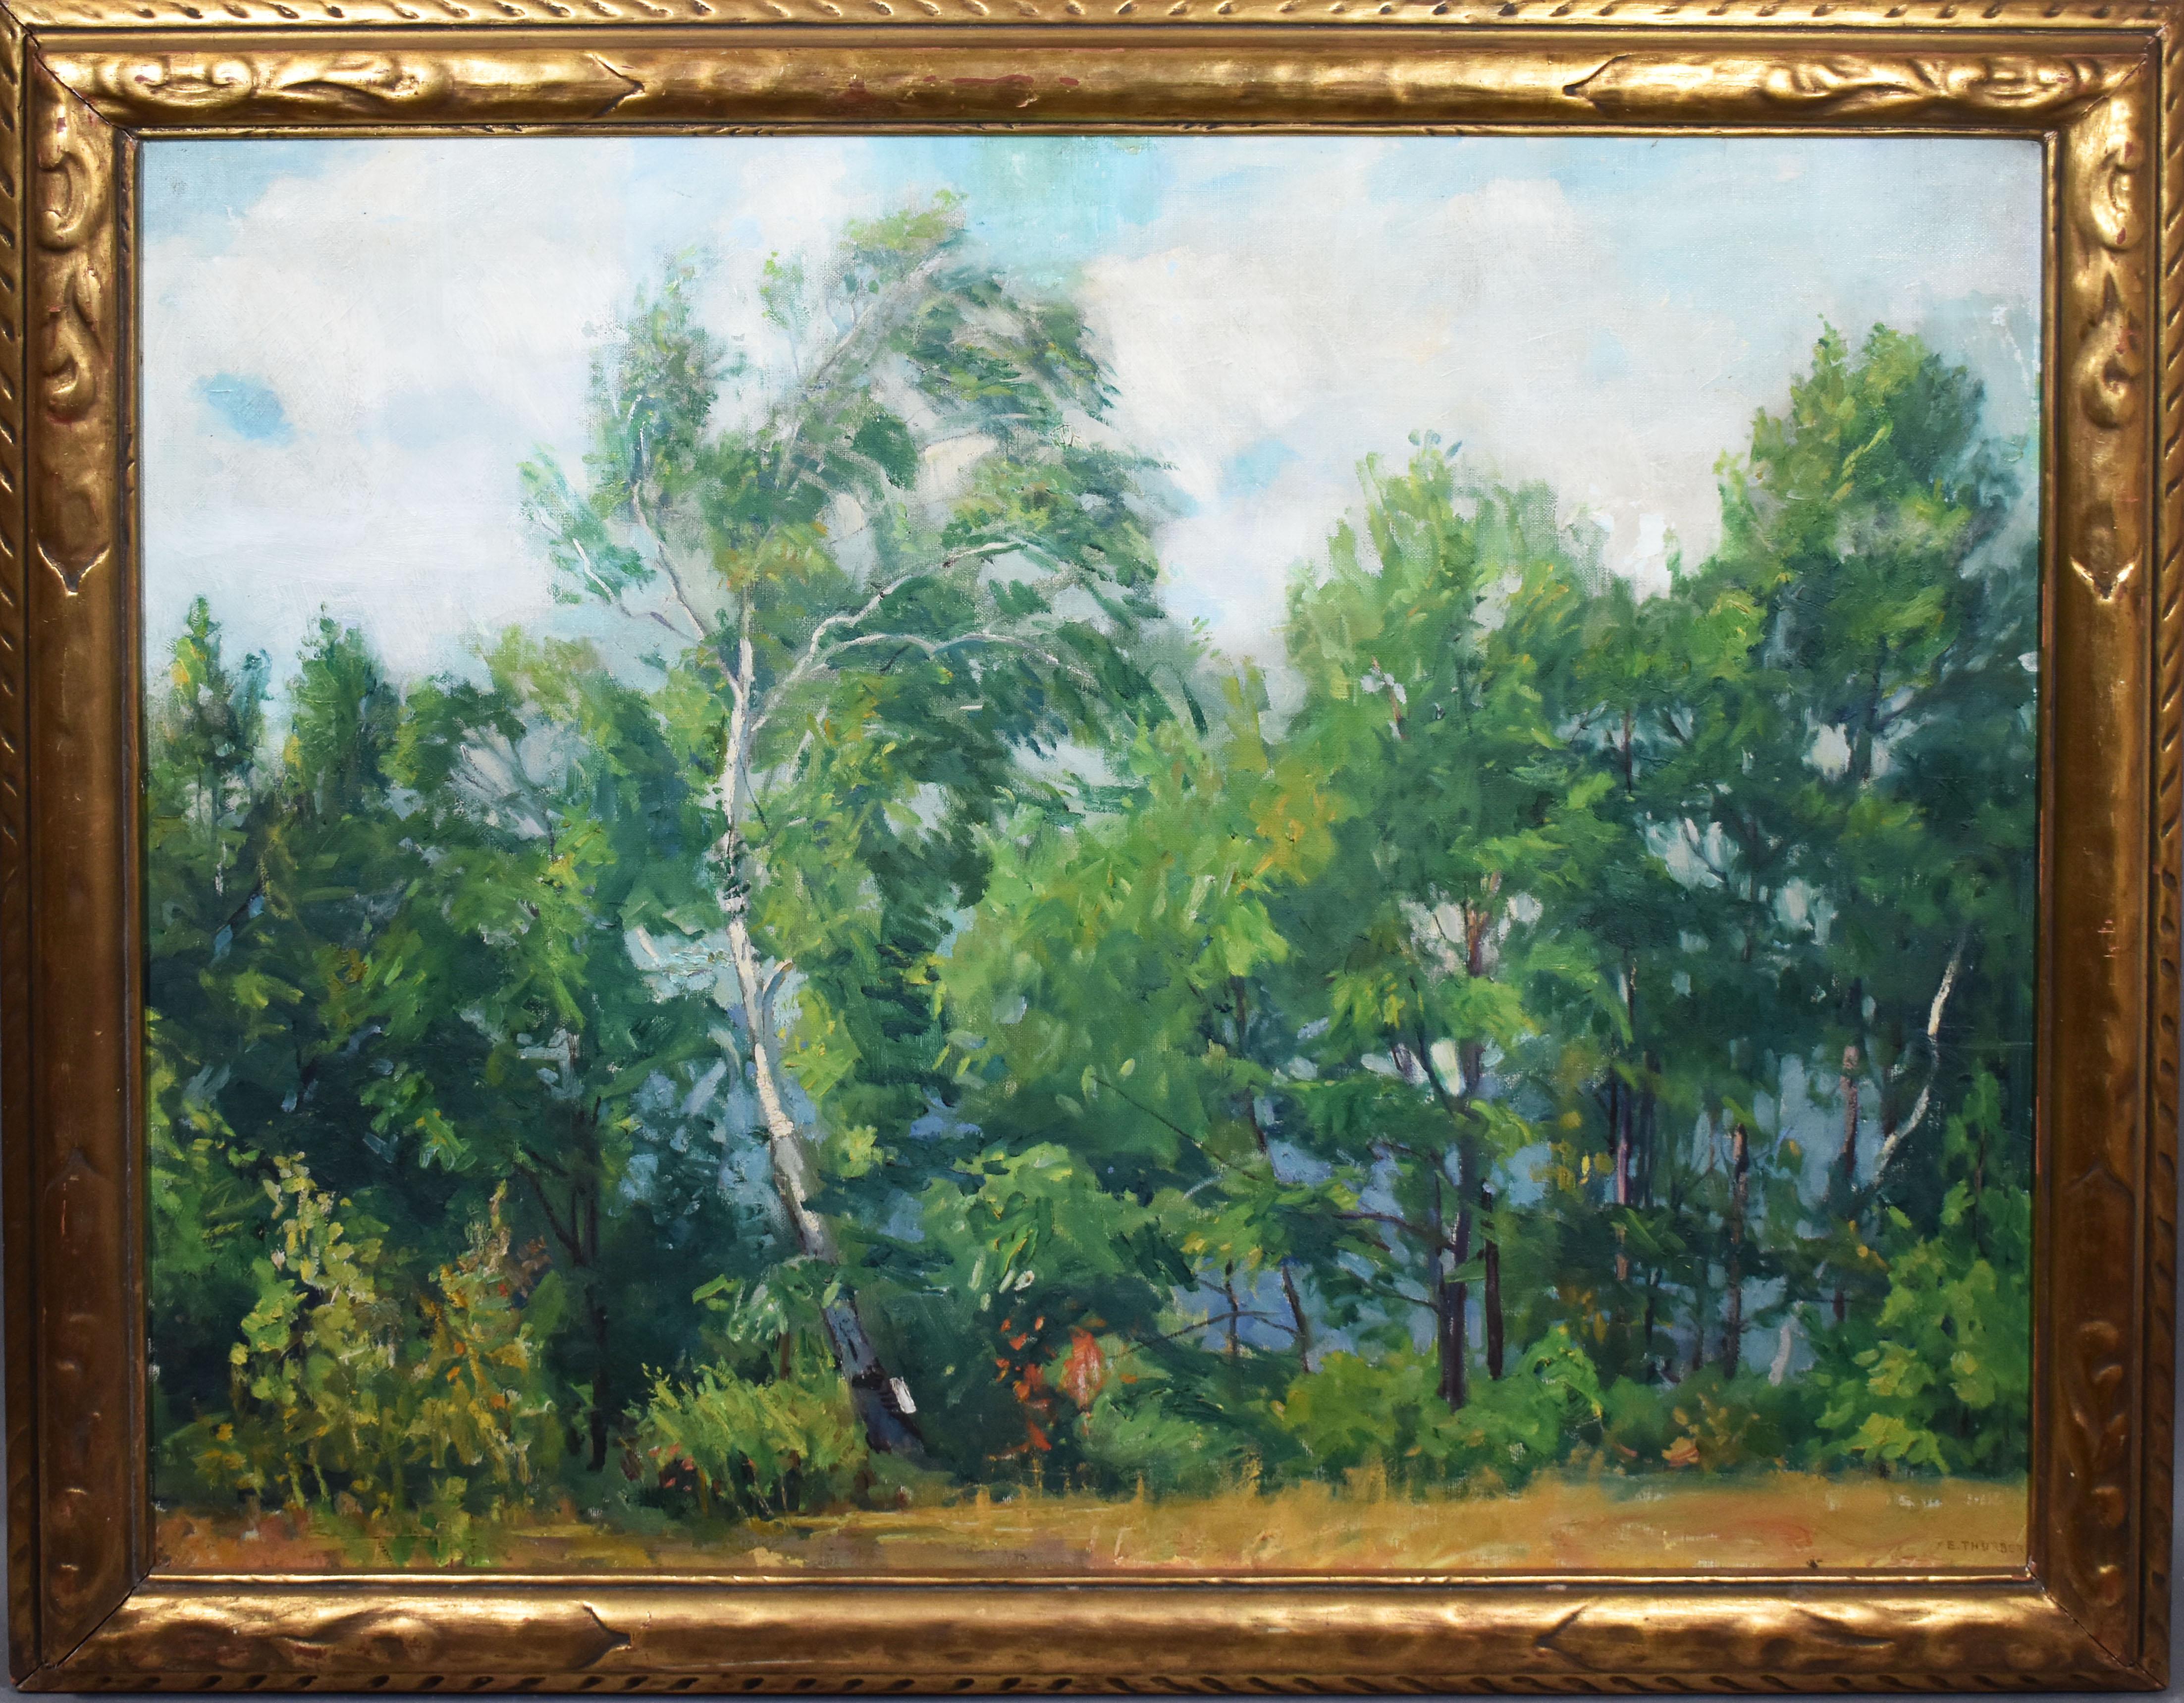 Edna Thurber Landscape Painting - Antique American Impressionist Tree Study Signed Rare Landscape Oil Painting 